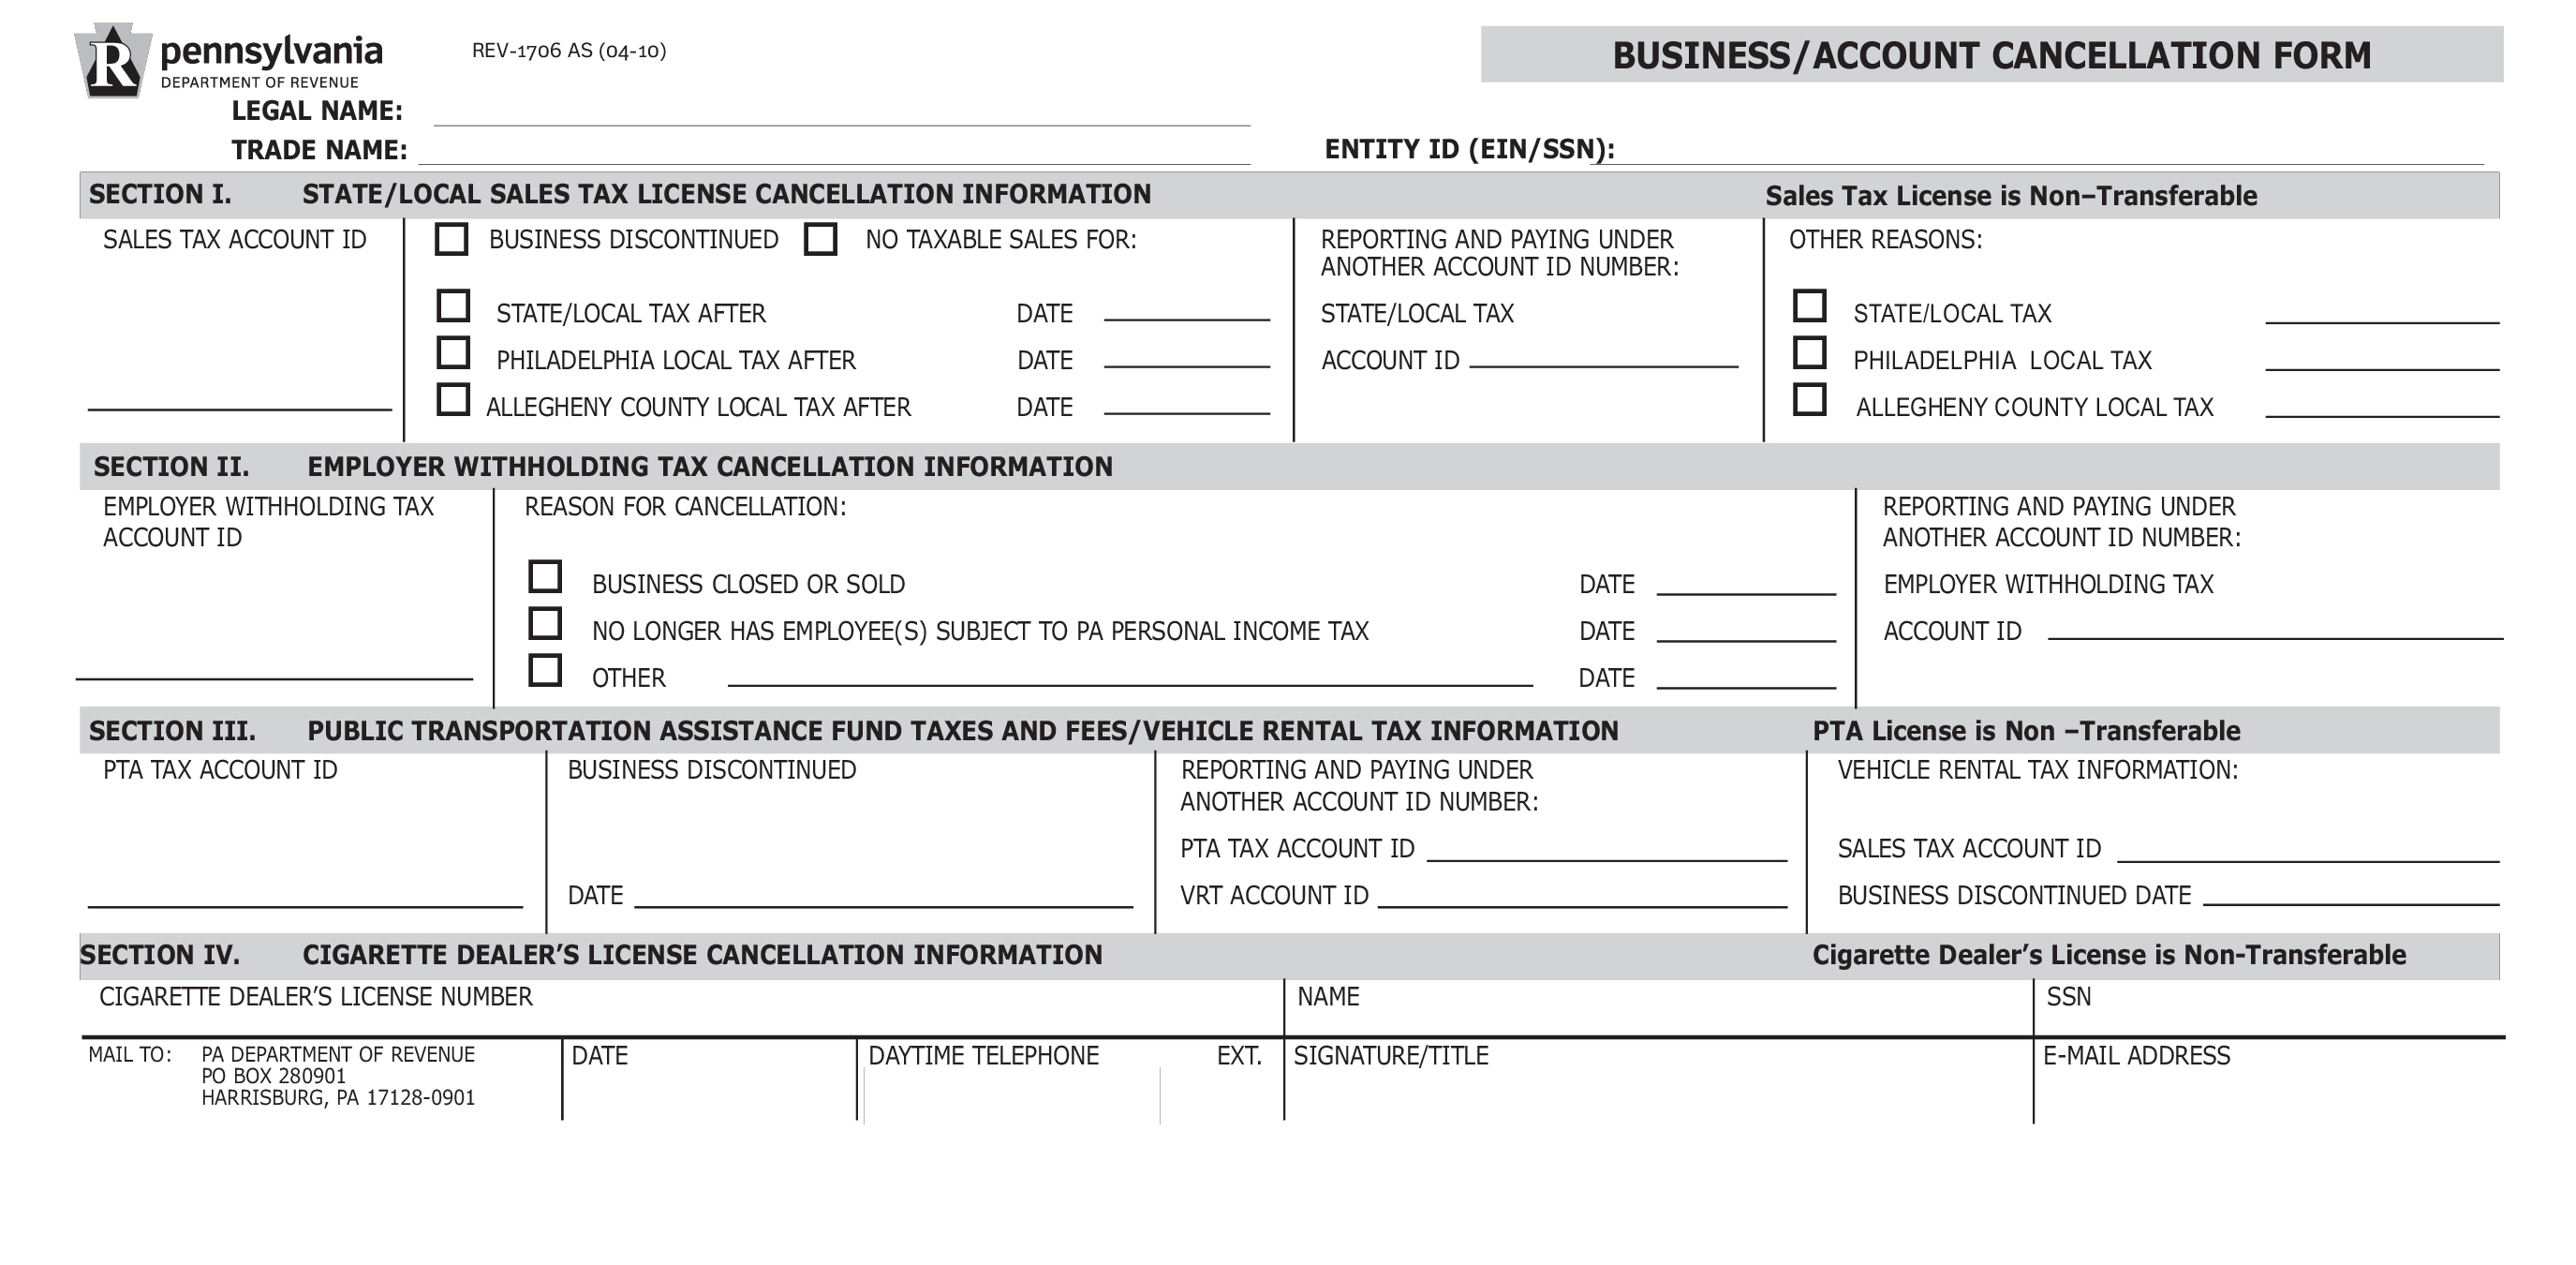 Business Account Cancellation Form main image